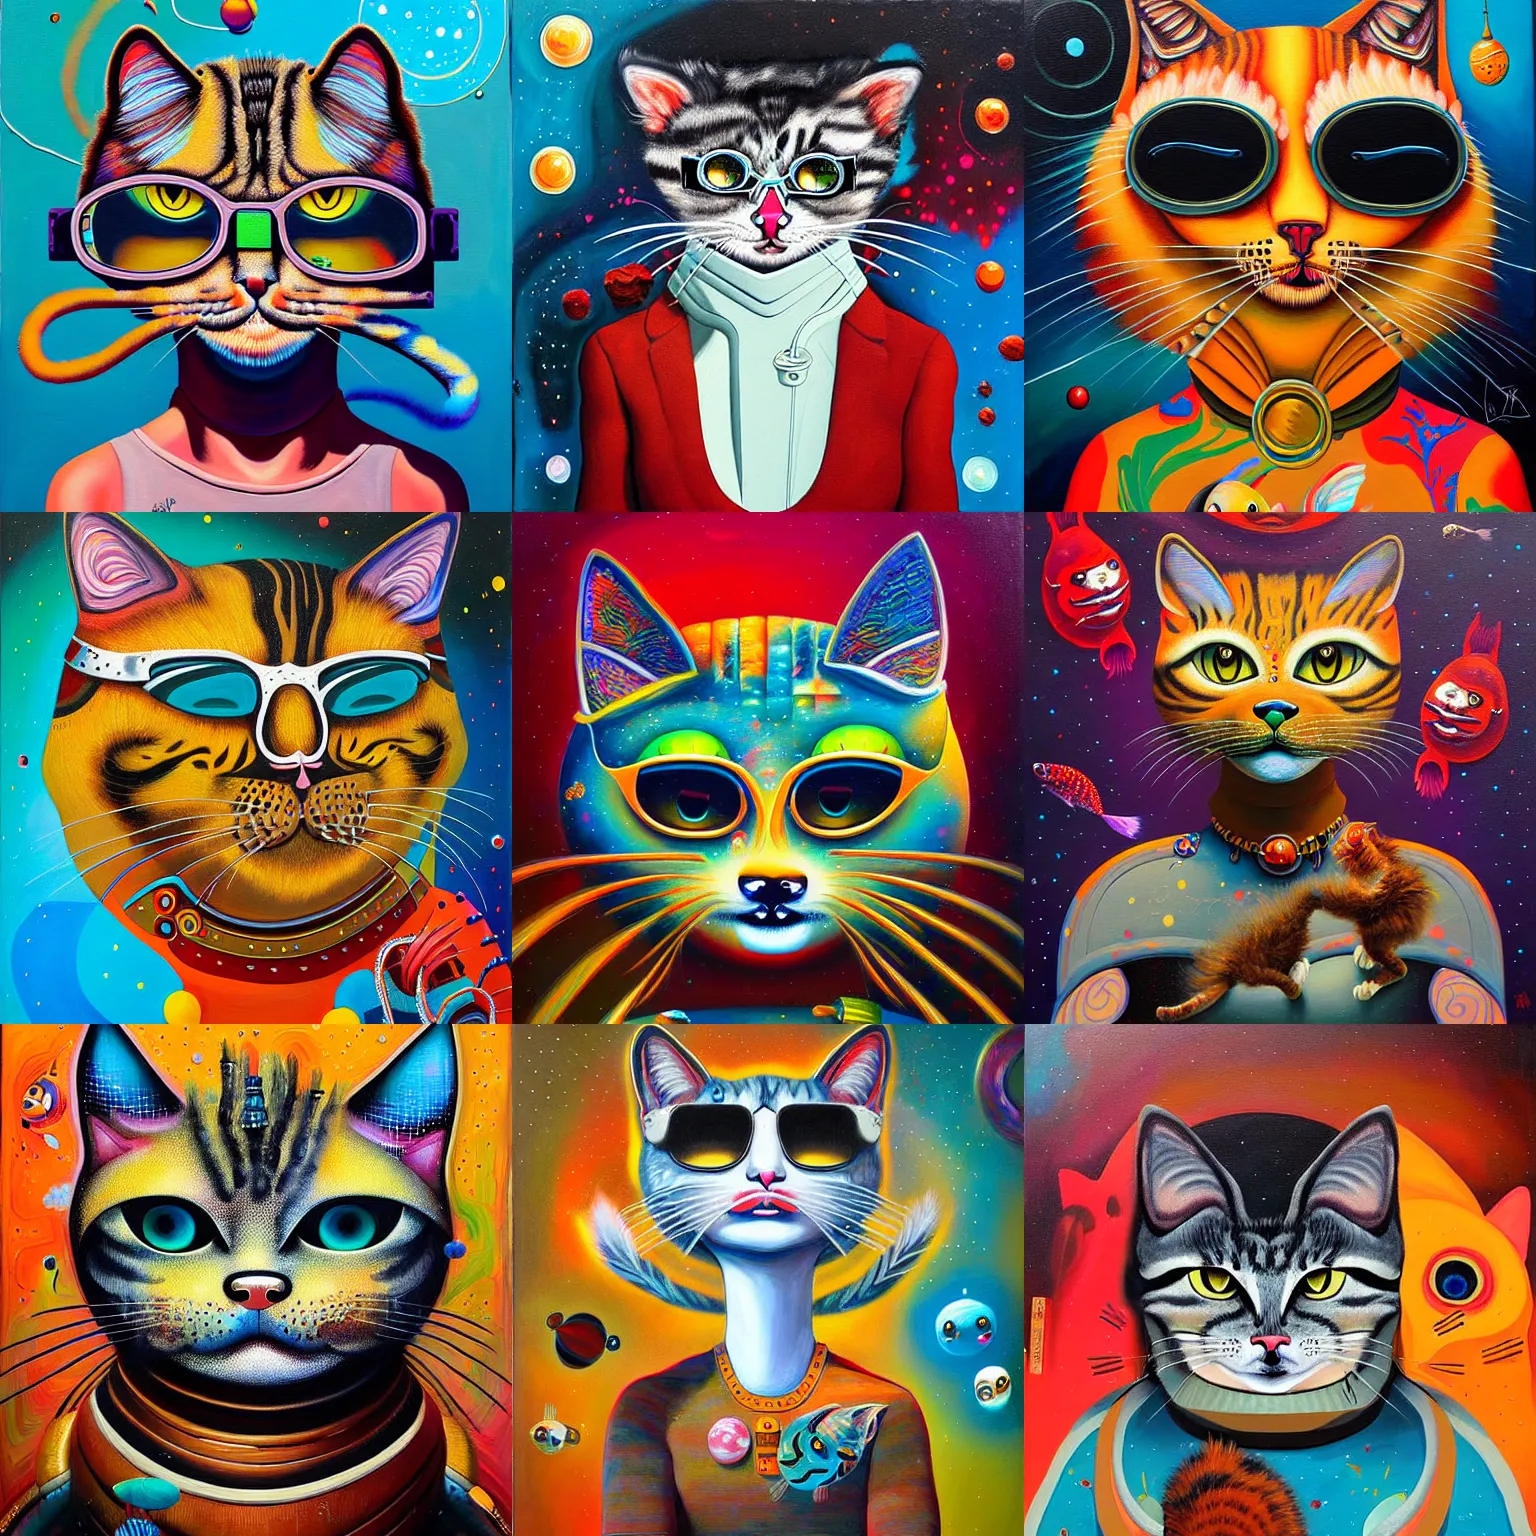 Prompt: anthropomorphic space cat painting by andrei riabovitchev, tara mcpherson, david choe, decorative fishes, detailed painterly impasto brushwork